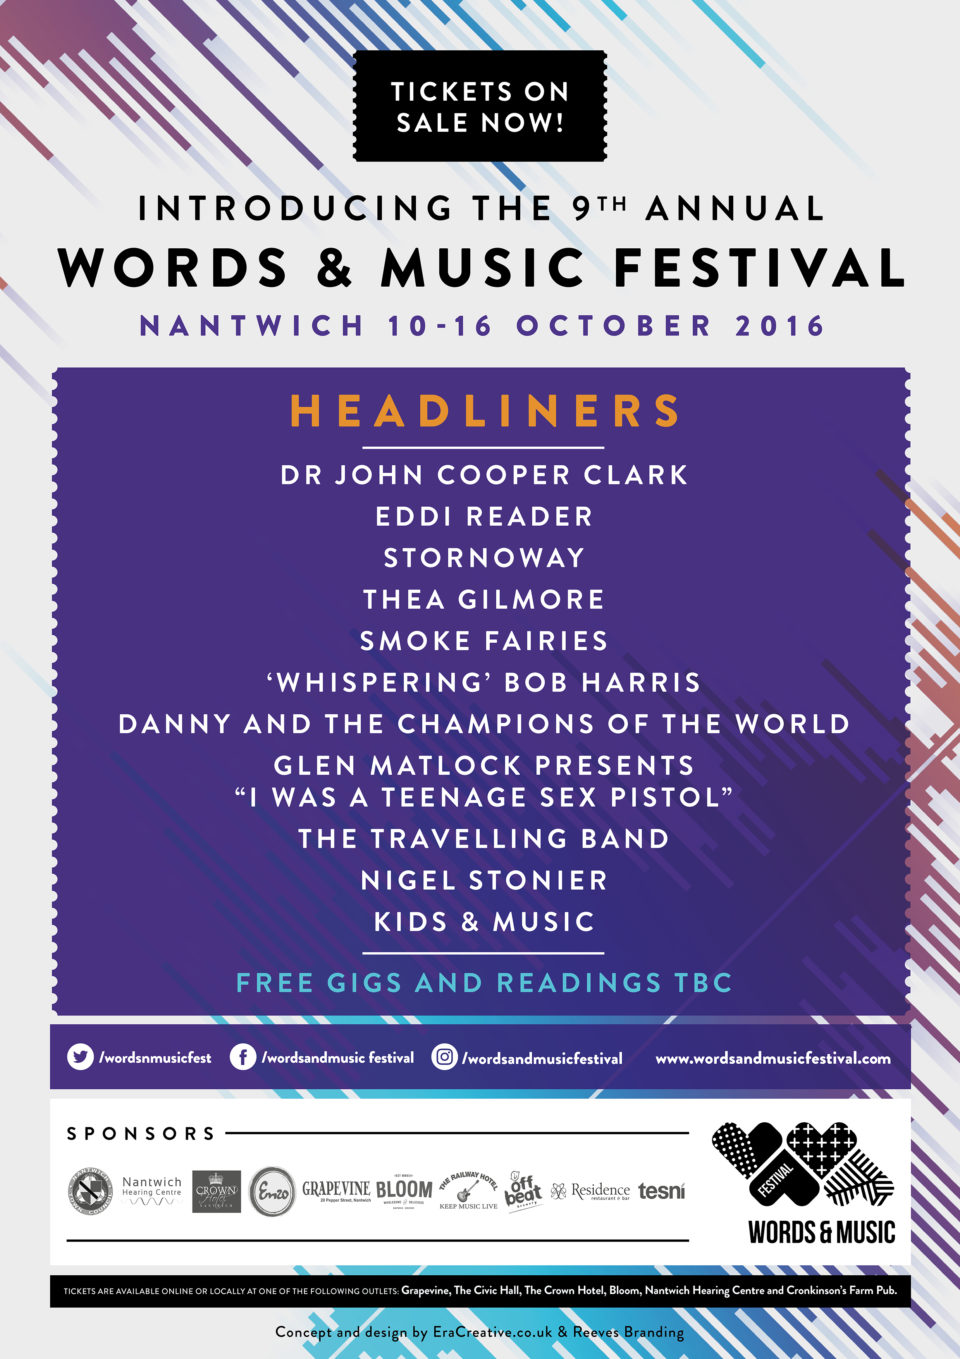 Tesni support the Nantwich Music and Words Festival this October